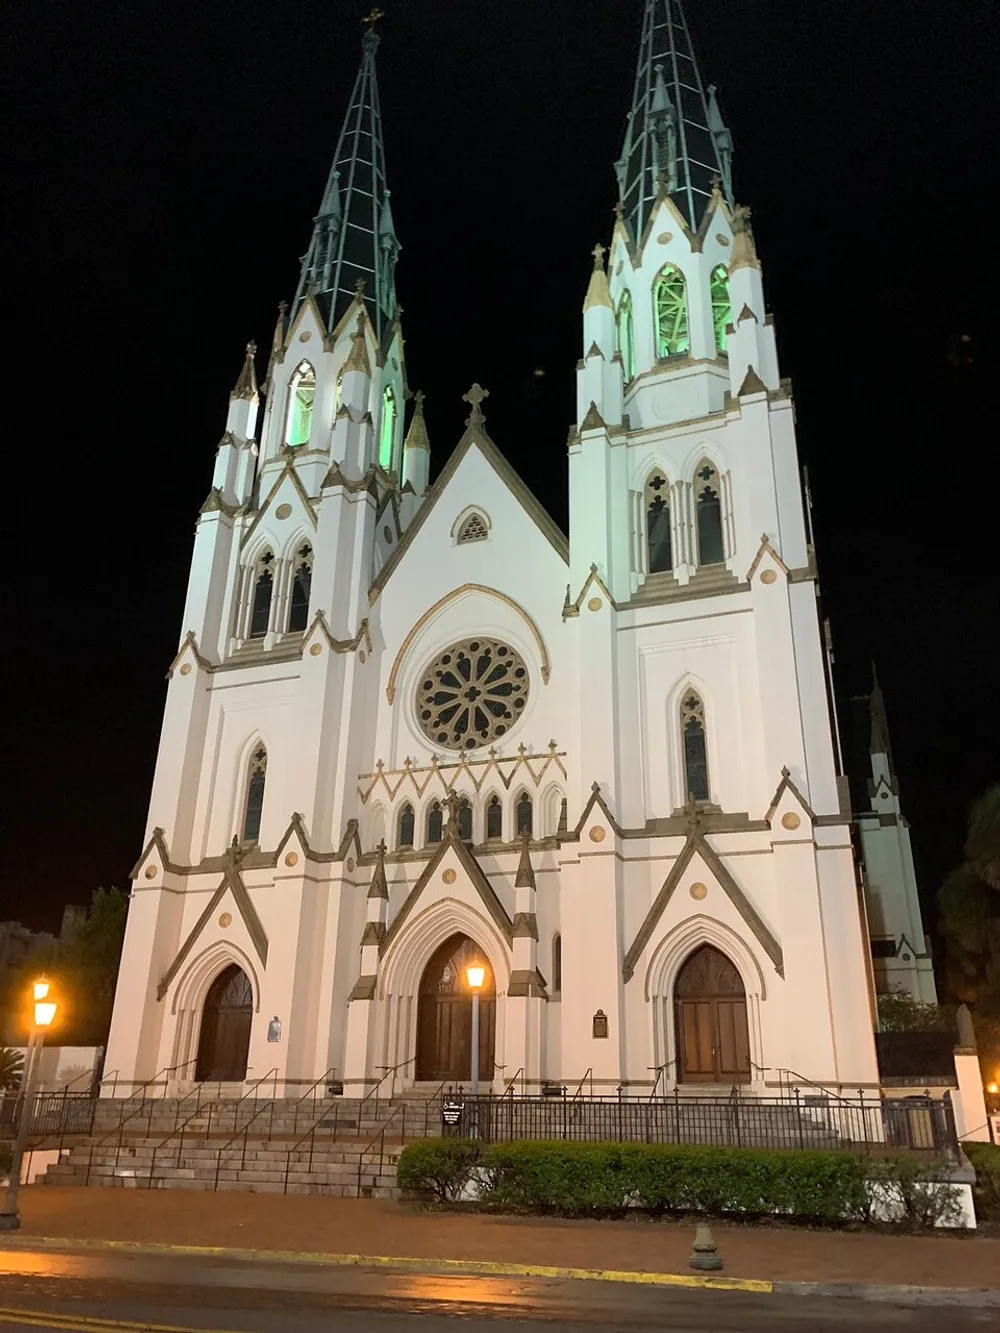 The photo depicts a grand white gothic revival-style church captured at night illuminated by both external lights and some internal lighting that shines through its stained glass highlighting its twin spires and intricate architectural details